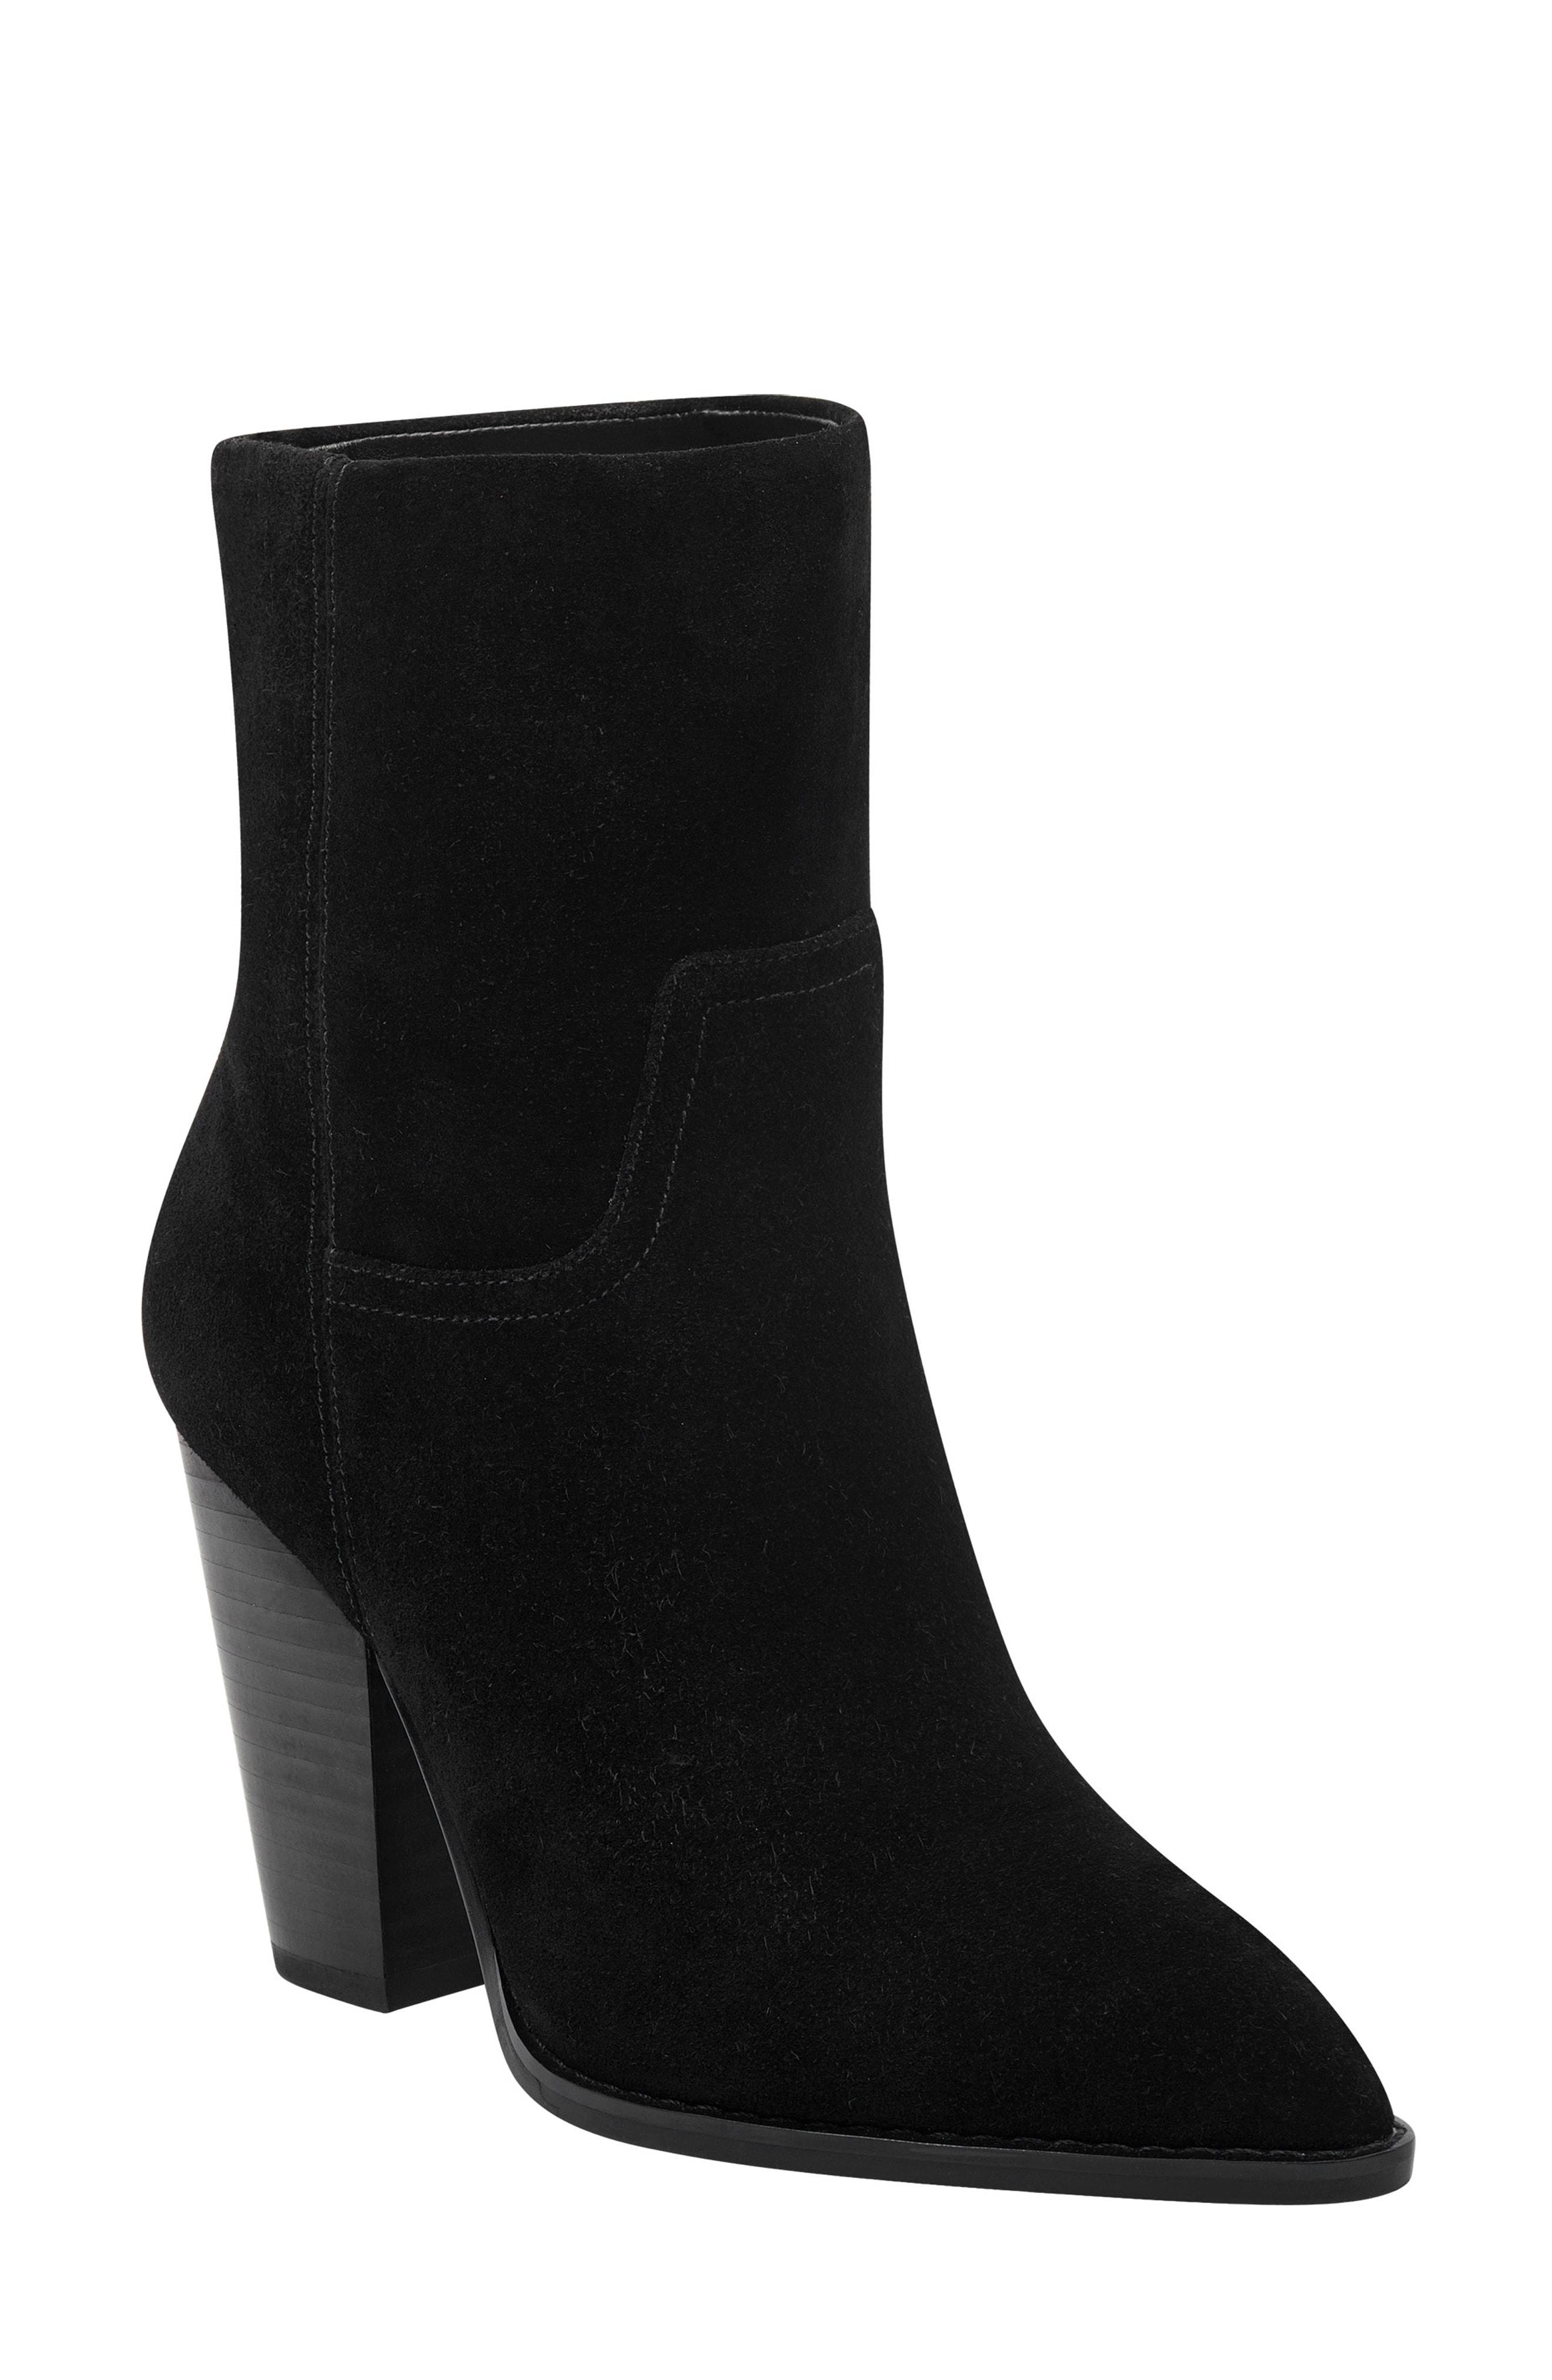 marc fisher black suede boots